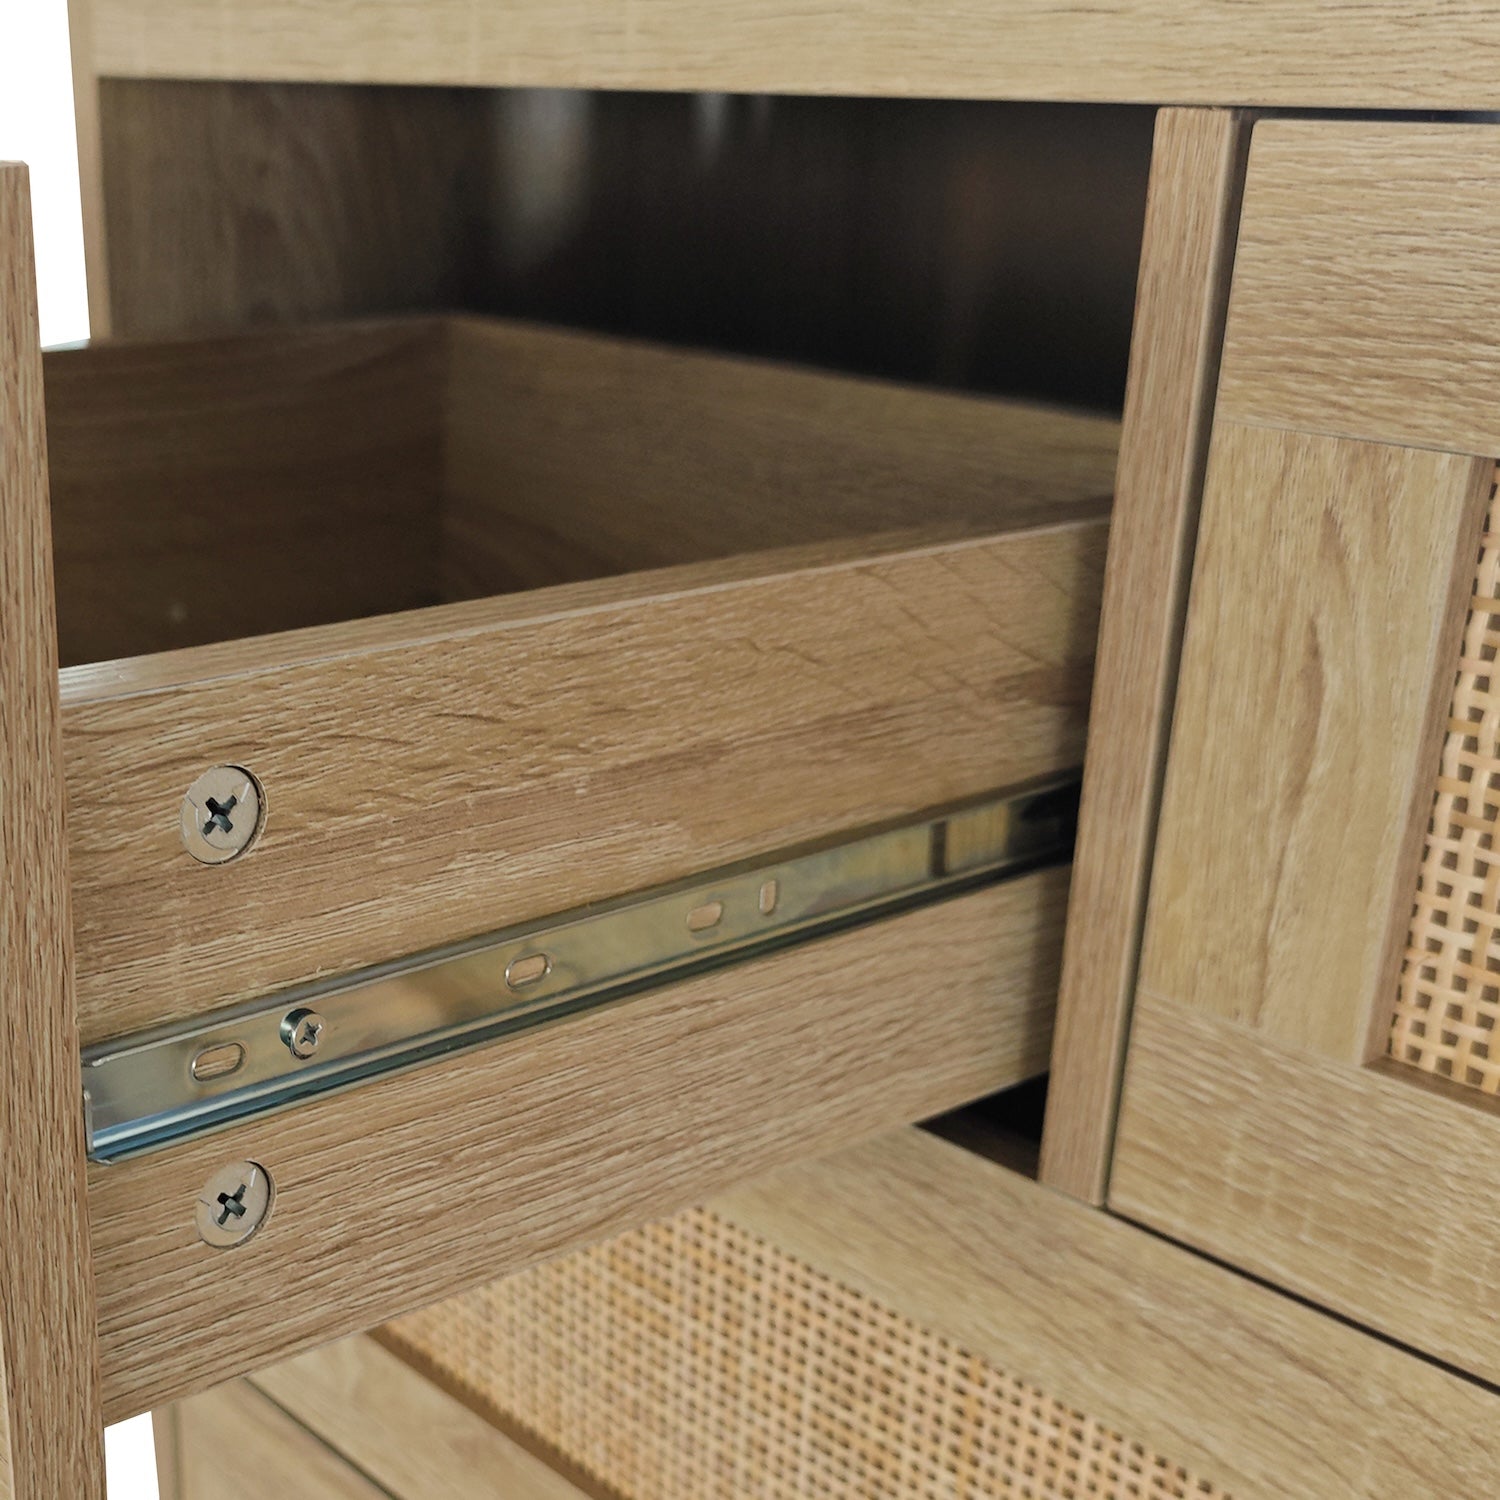 Danita 4-Drawer Cabinet in Natural Finish with Rattan Drawer Fronts